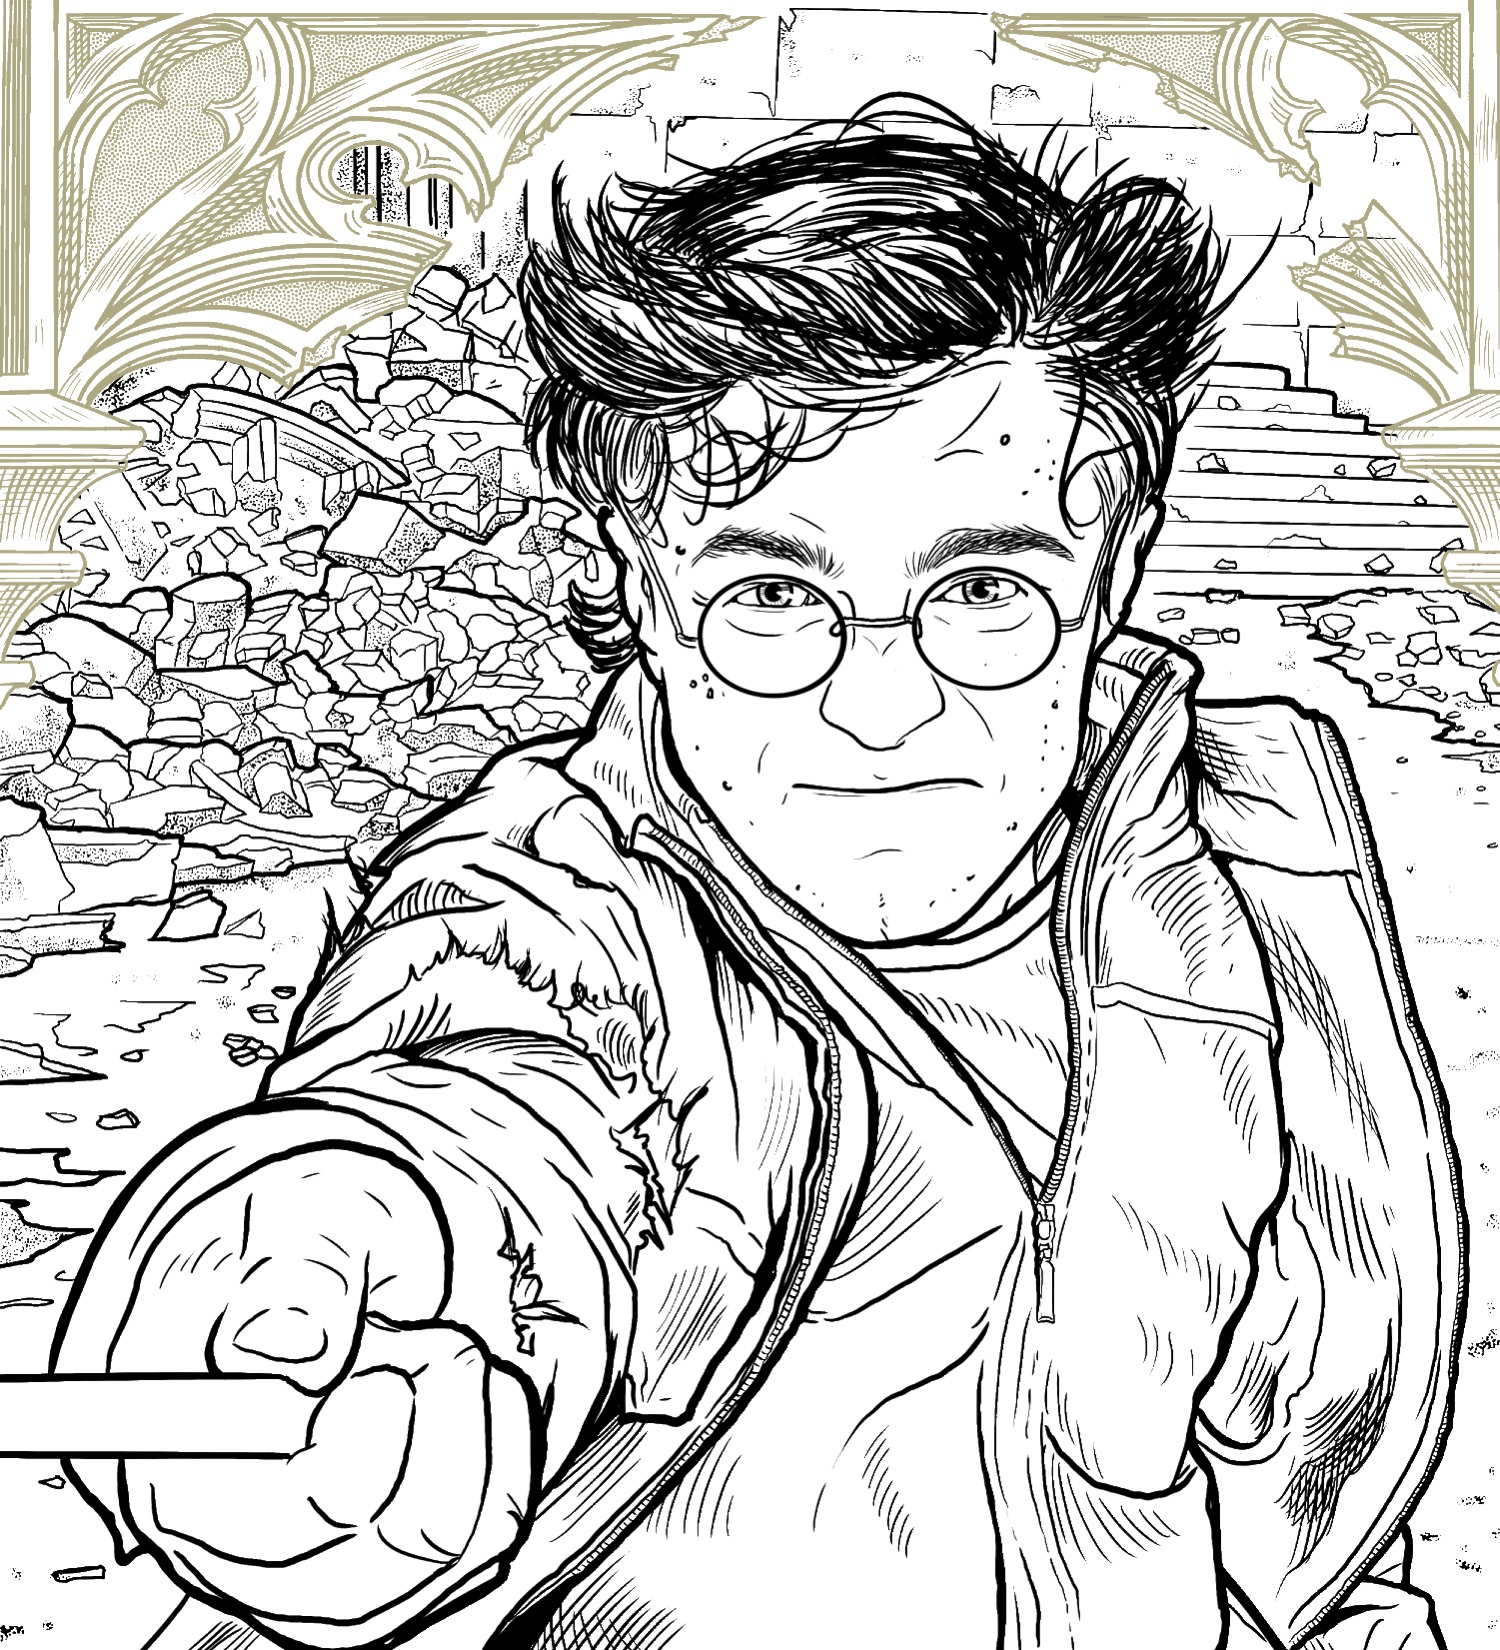 EXCLUSIVE look at new Harry Potter colouring book from Insight Editions